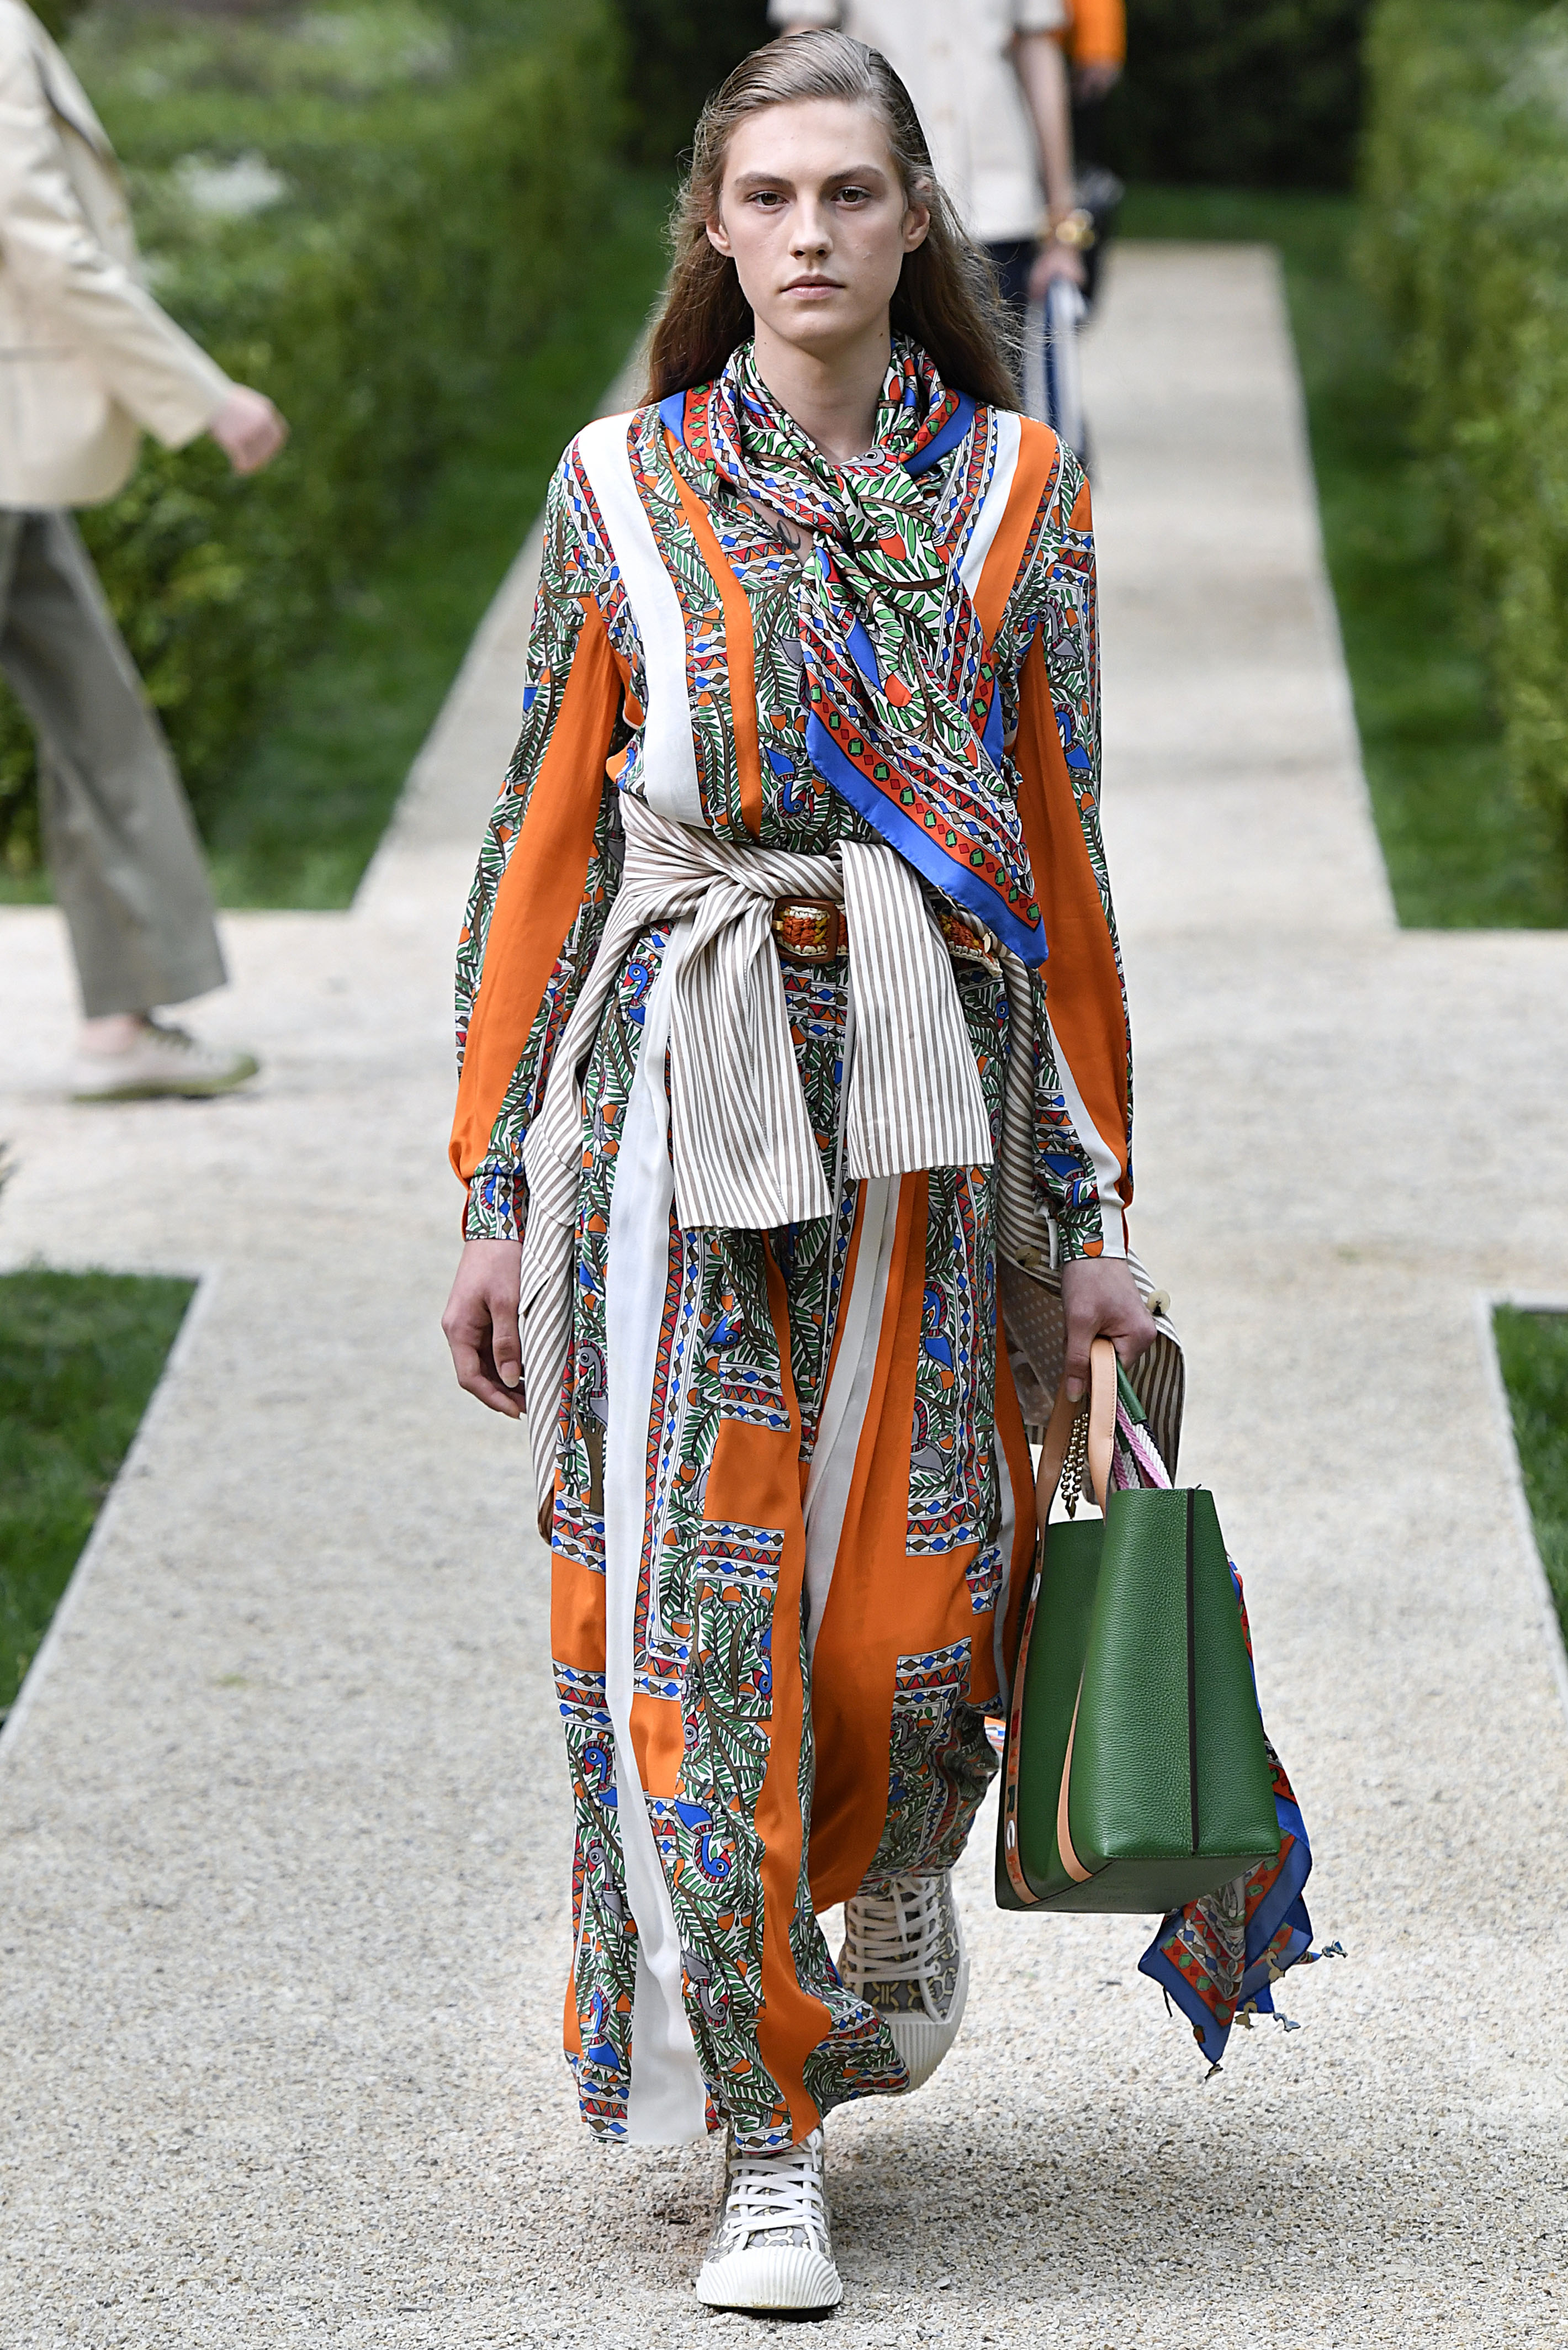 Tory Burch And The Handsome Prints. A Tale Of A Life Less Ordinary